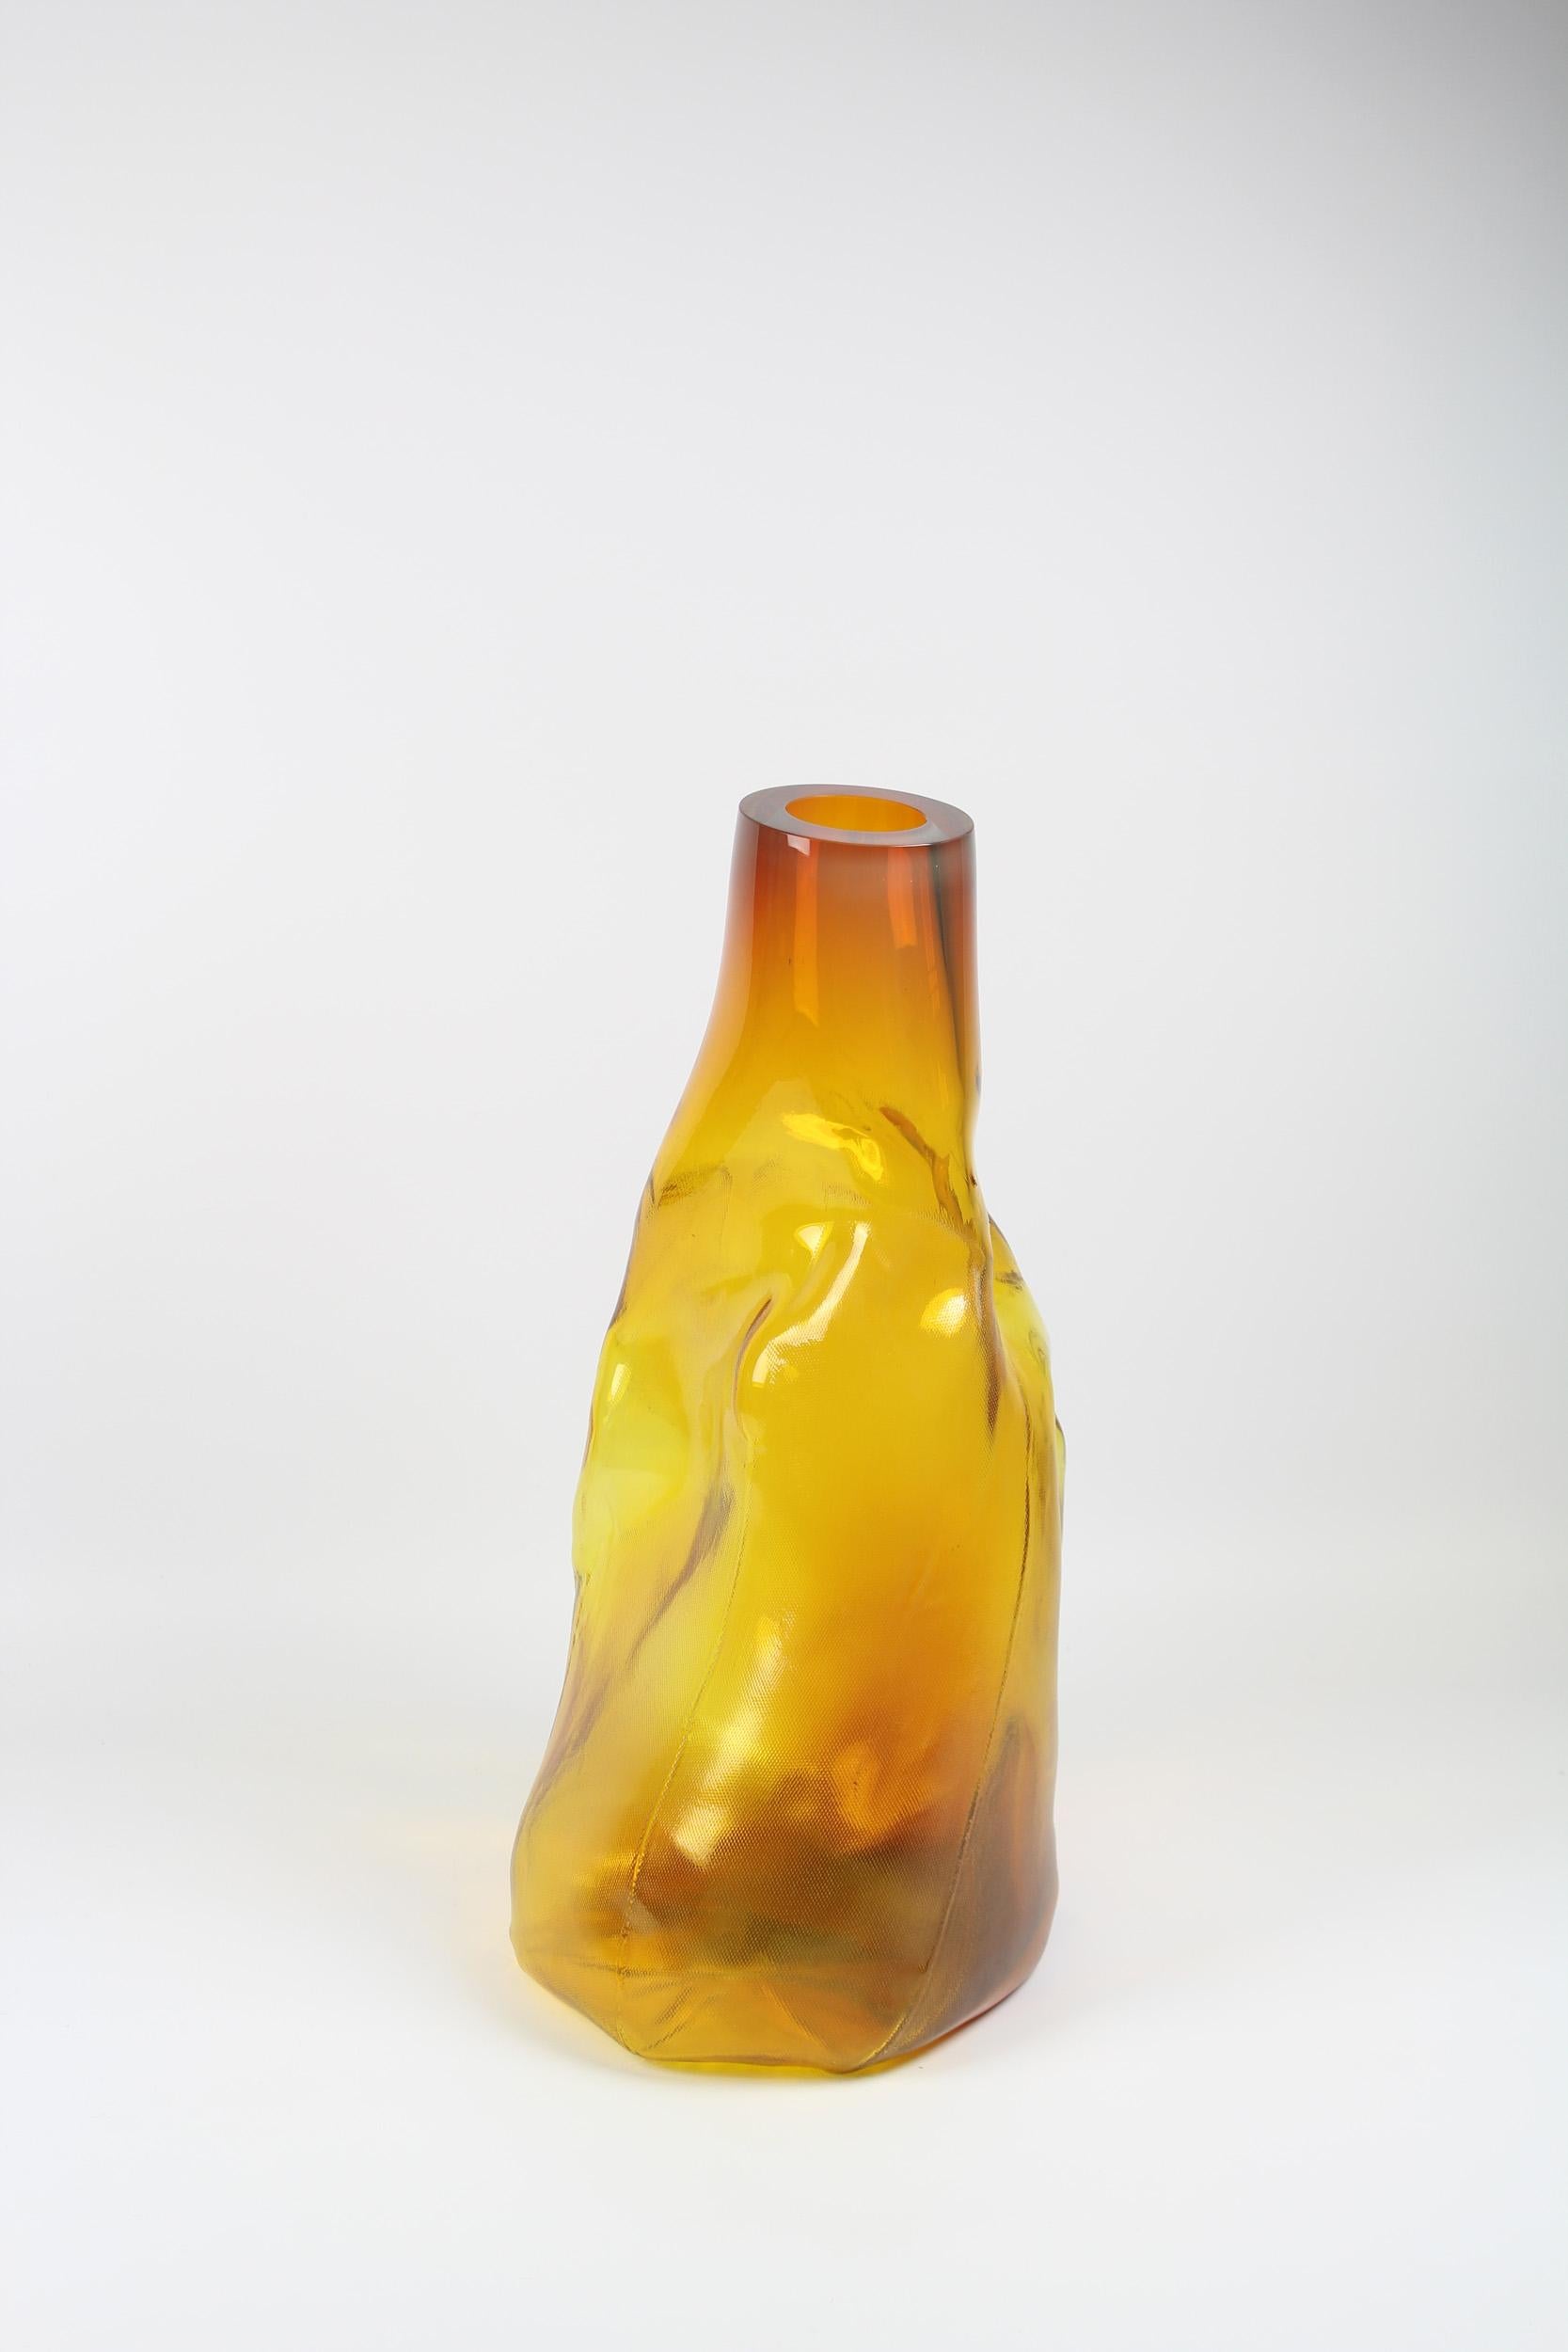 105 Ltr Forms, Brilliant Gold, Handmade Glass Object by Vogel Studio In New Condition For Sale In Sarstedt, NI